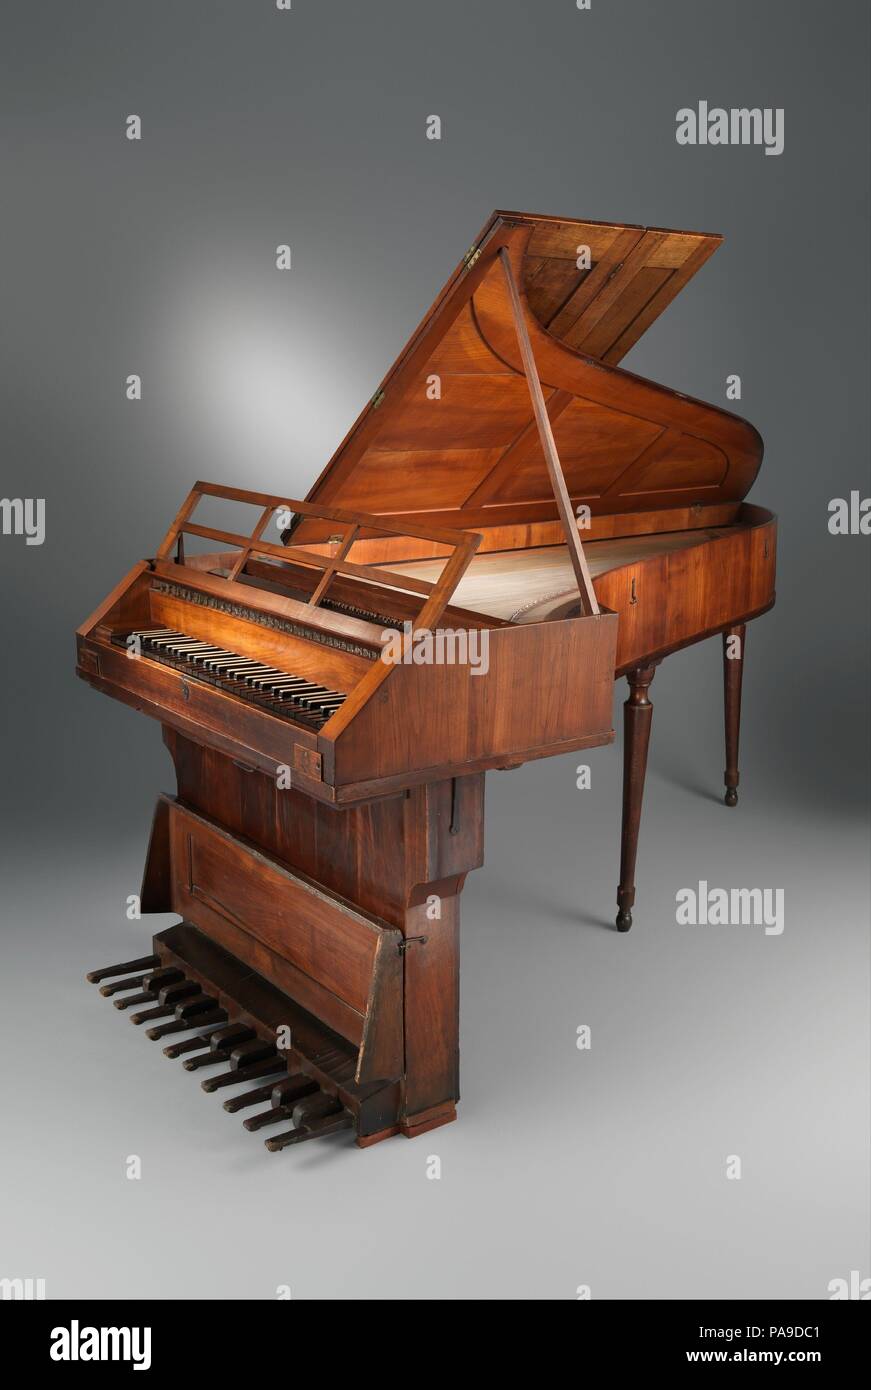 Grand Piano. Culture: Austrian (Salzburg). Dimensions: 36 15/16 × 40 3/16 × 83 7/16 in. (93.8 × 102 × 212 cm)  Height (Total): 36 15/16 in. (93.8 cm)  Width (Of case, parallel to keyboard): 40 3/16 in. (102. cm)  Depth (Of case, perpendicular to keyboard): 83 7/16 in. (212 cm). Maker: Attributed to Johann Schmidt (Austrian 1757-1804). Date: ca. 1790-95.  This extraordinarily rare piano from about 1790 has a pedal board with eighteen notes that are played like pedals on an organ. Pedal stringed-keyboard instruments were not uncommon in the eighteenth century. Johann Sebastian Bach is known to h Stock Photo